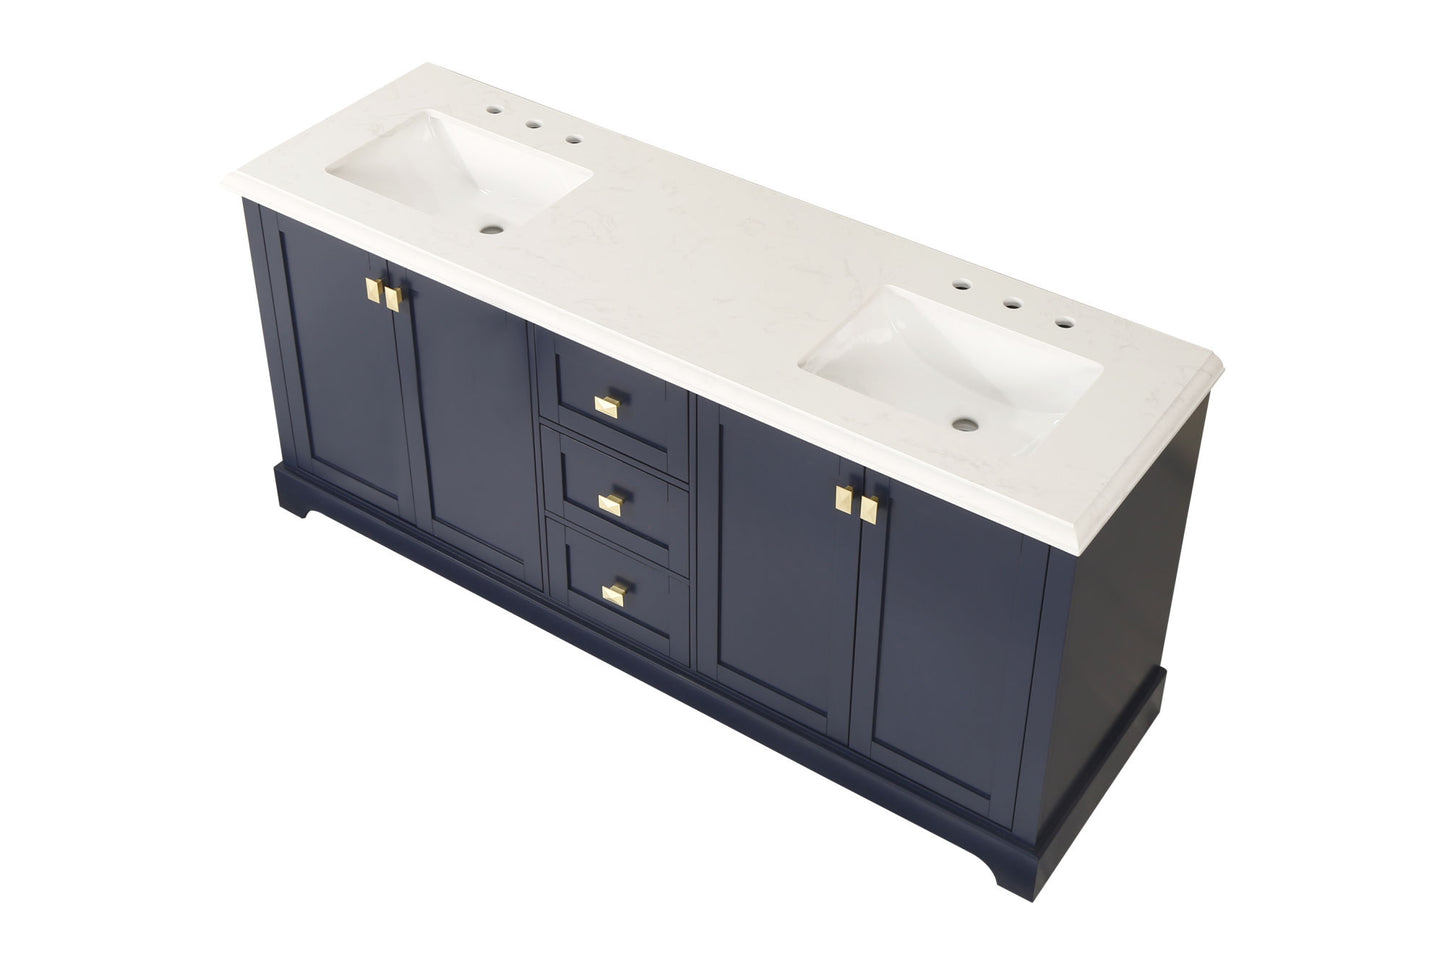 Vanity Sink Combo featuring a Marble Countertop, Bathroom Sink Cabinet, and Home Decor Bathroom Vanities - Fully Assembled Blue 72-inch Vanity with Sink 23V02-72NB